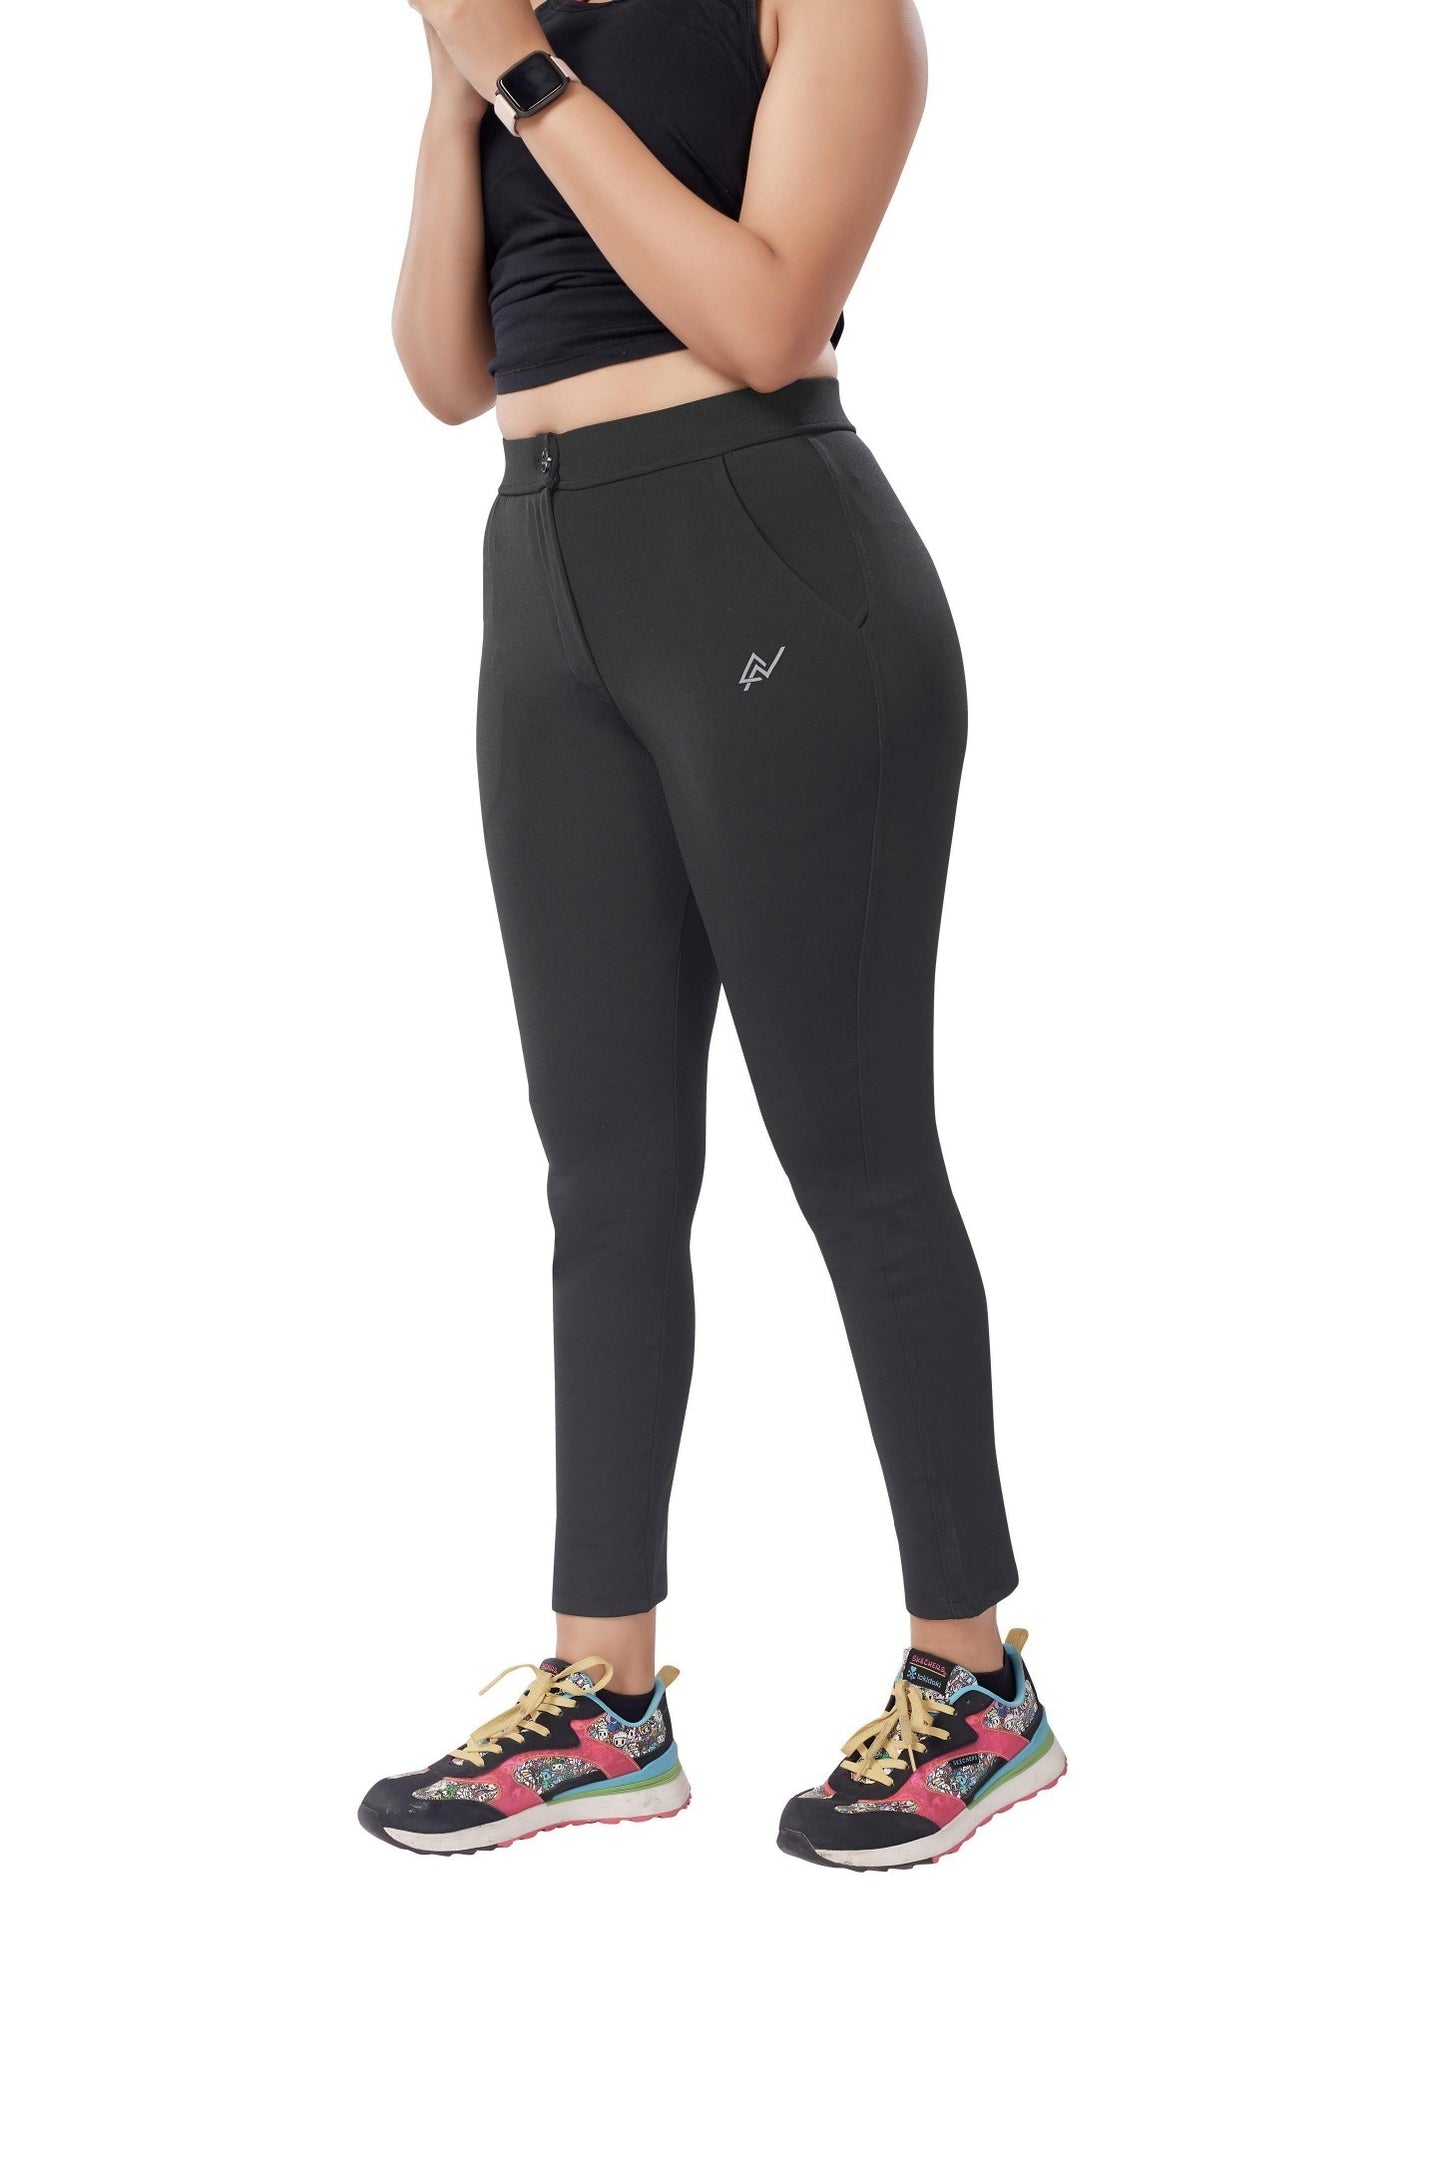 Black Colour Polyester Solid Pattern Track Pant For Women's